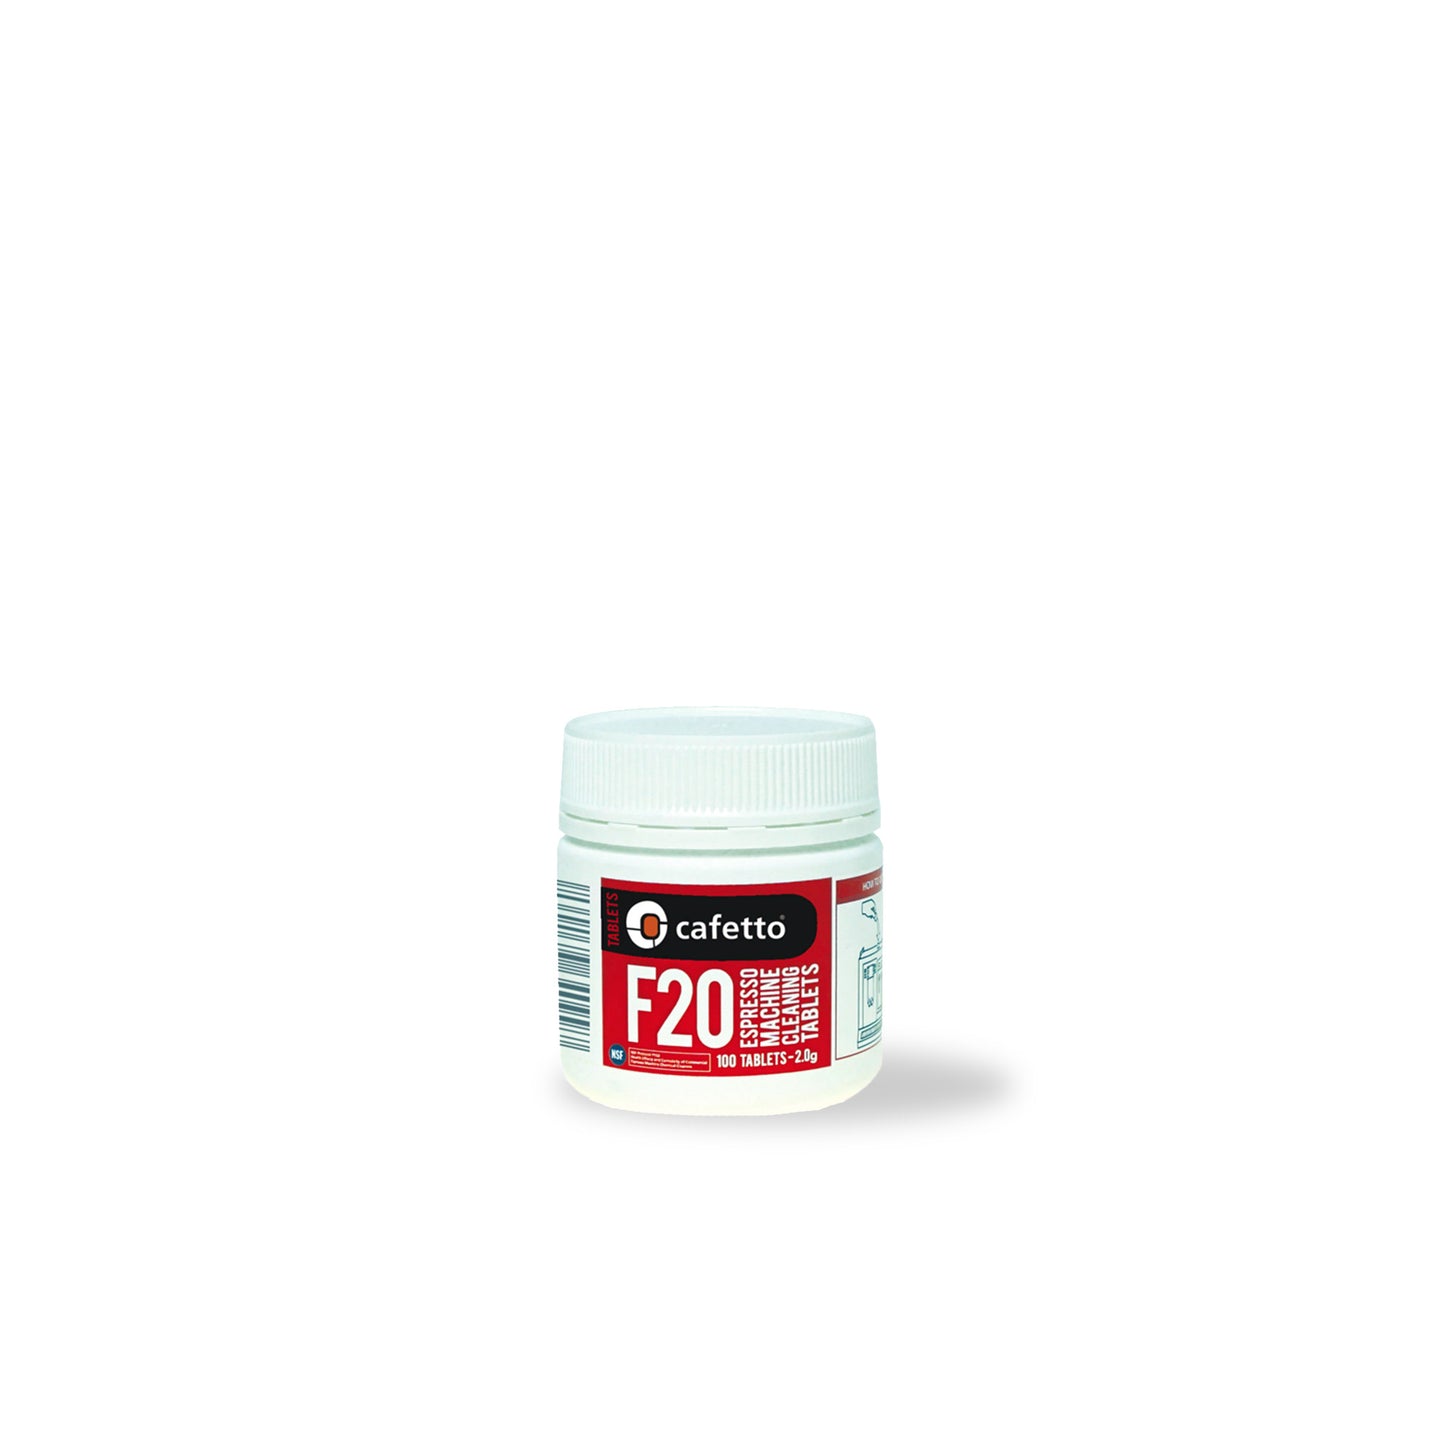 Cafetto F20 Tablets (2.0g)